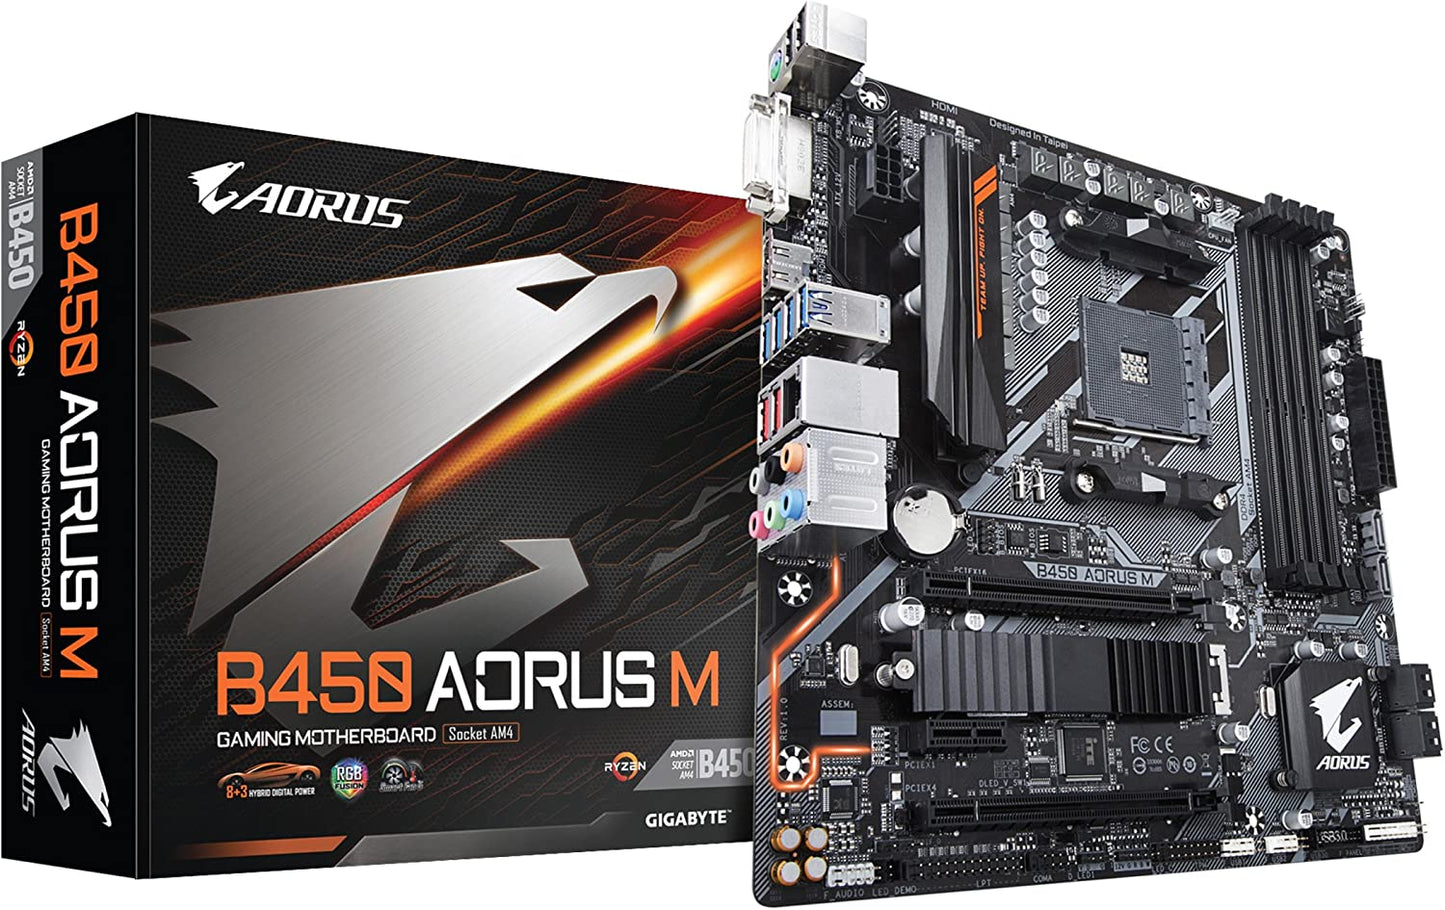 Gigabyte B450 Aorus M Micro ATX Motherboard with Ryzen AM4 Socket M.2 Thermal Guard and Support for HDMI DVI DDR4 Memory and USB 3.1 Gen2 for Desktop Computers